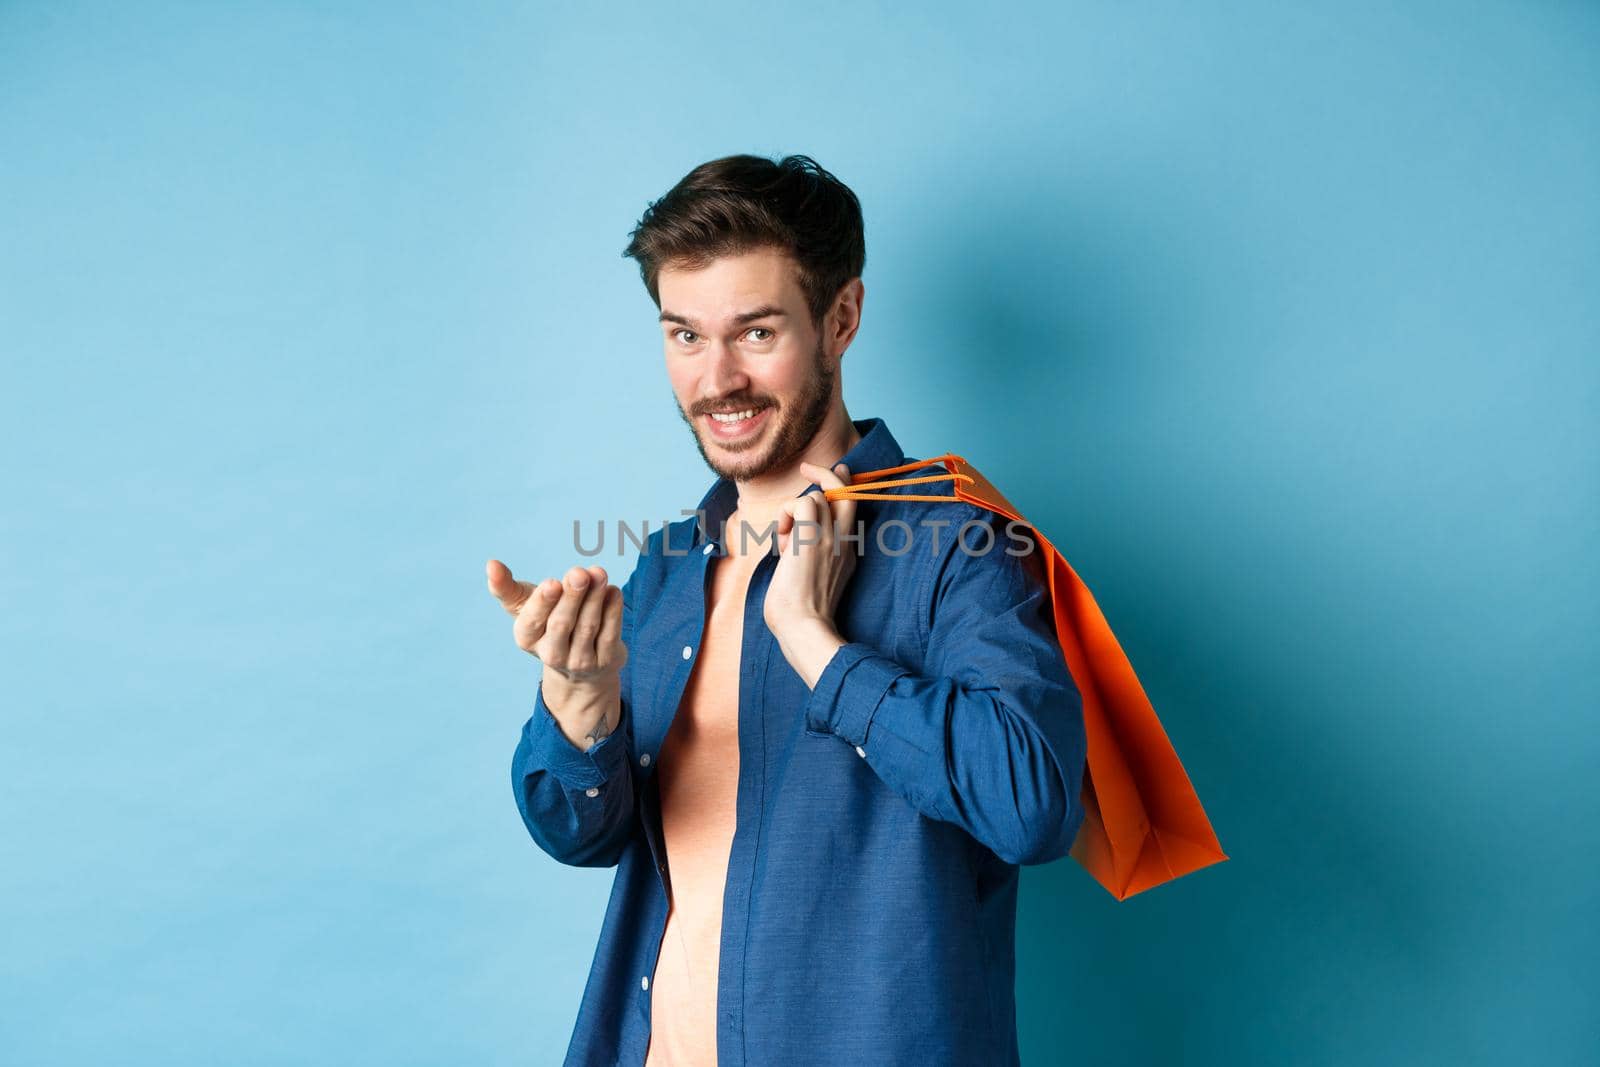 Modern guy holding shopping bag behind shoulder and beckon you, telling to come closer or inviting to store, standing on blue background.